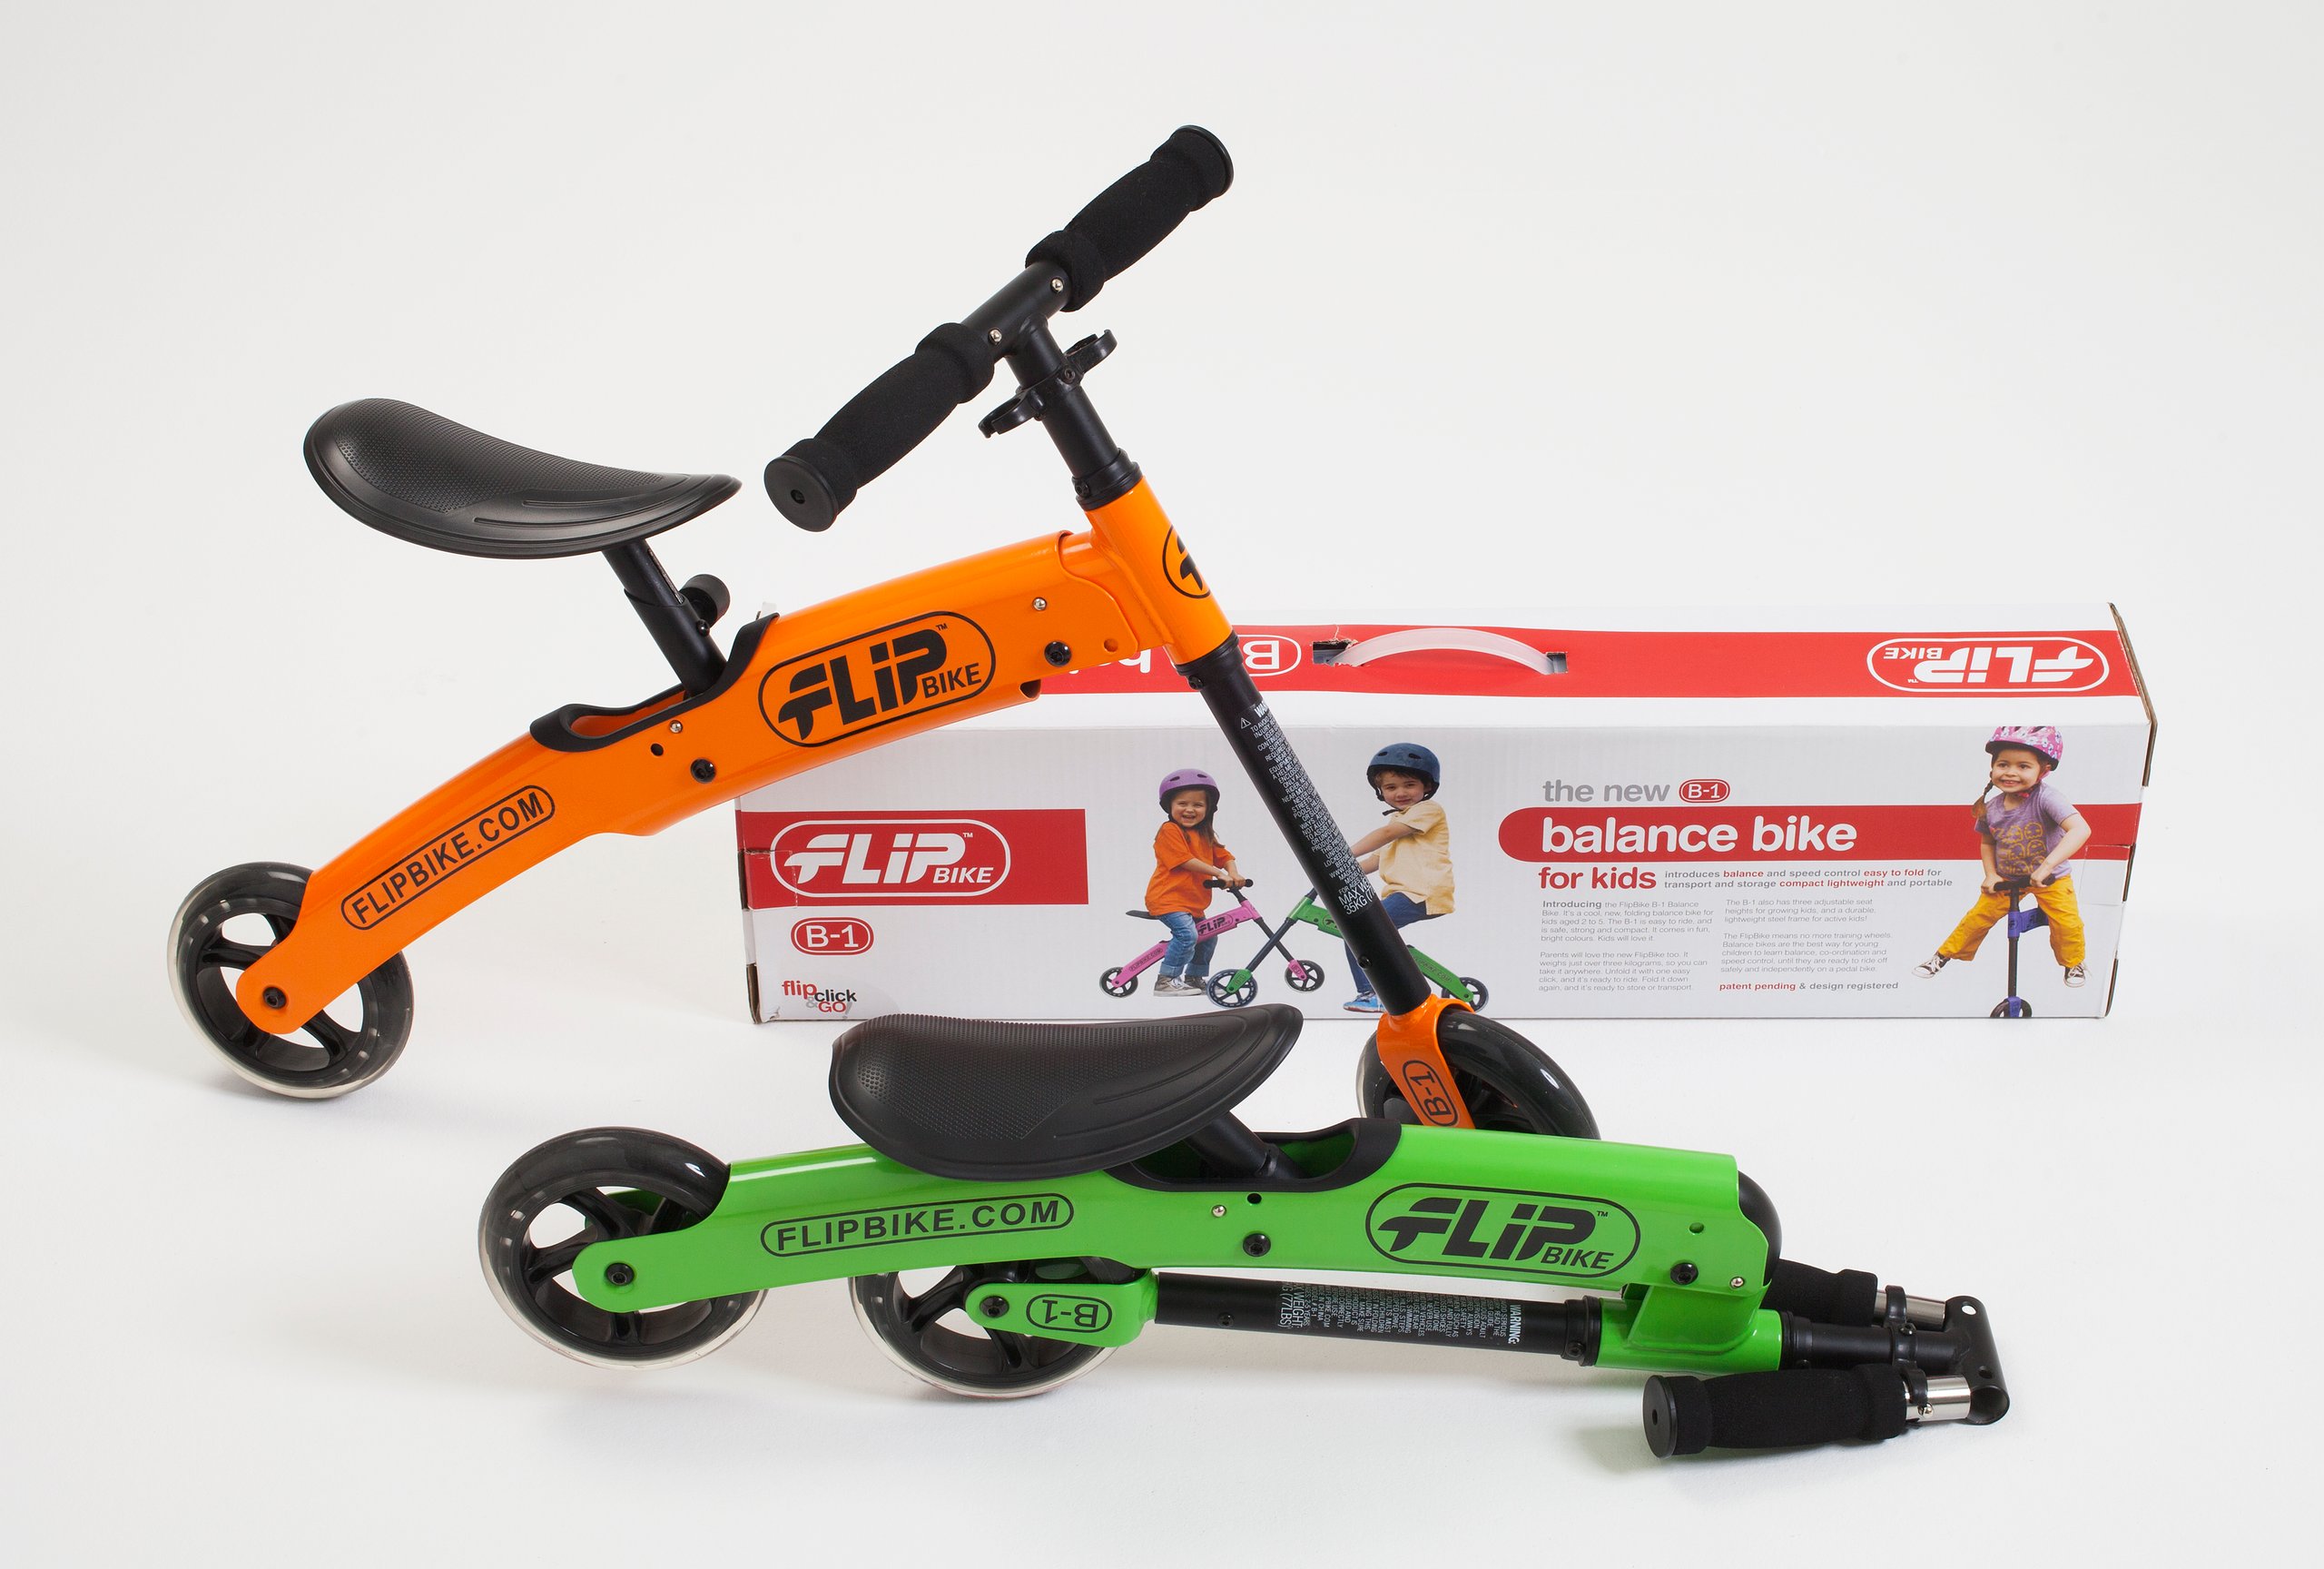 FlipBike folding balance bicycle with manual and packaging